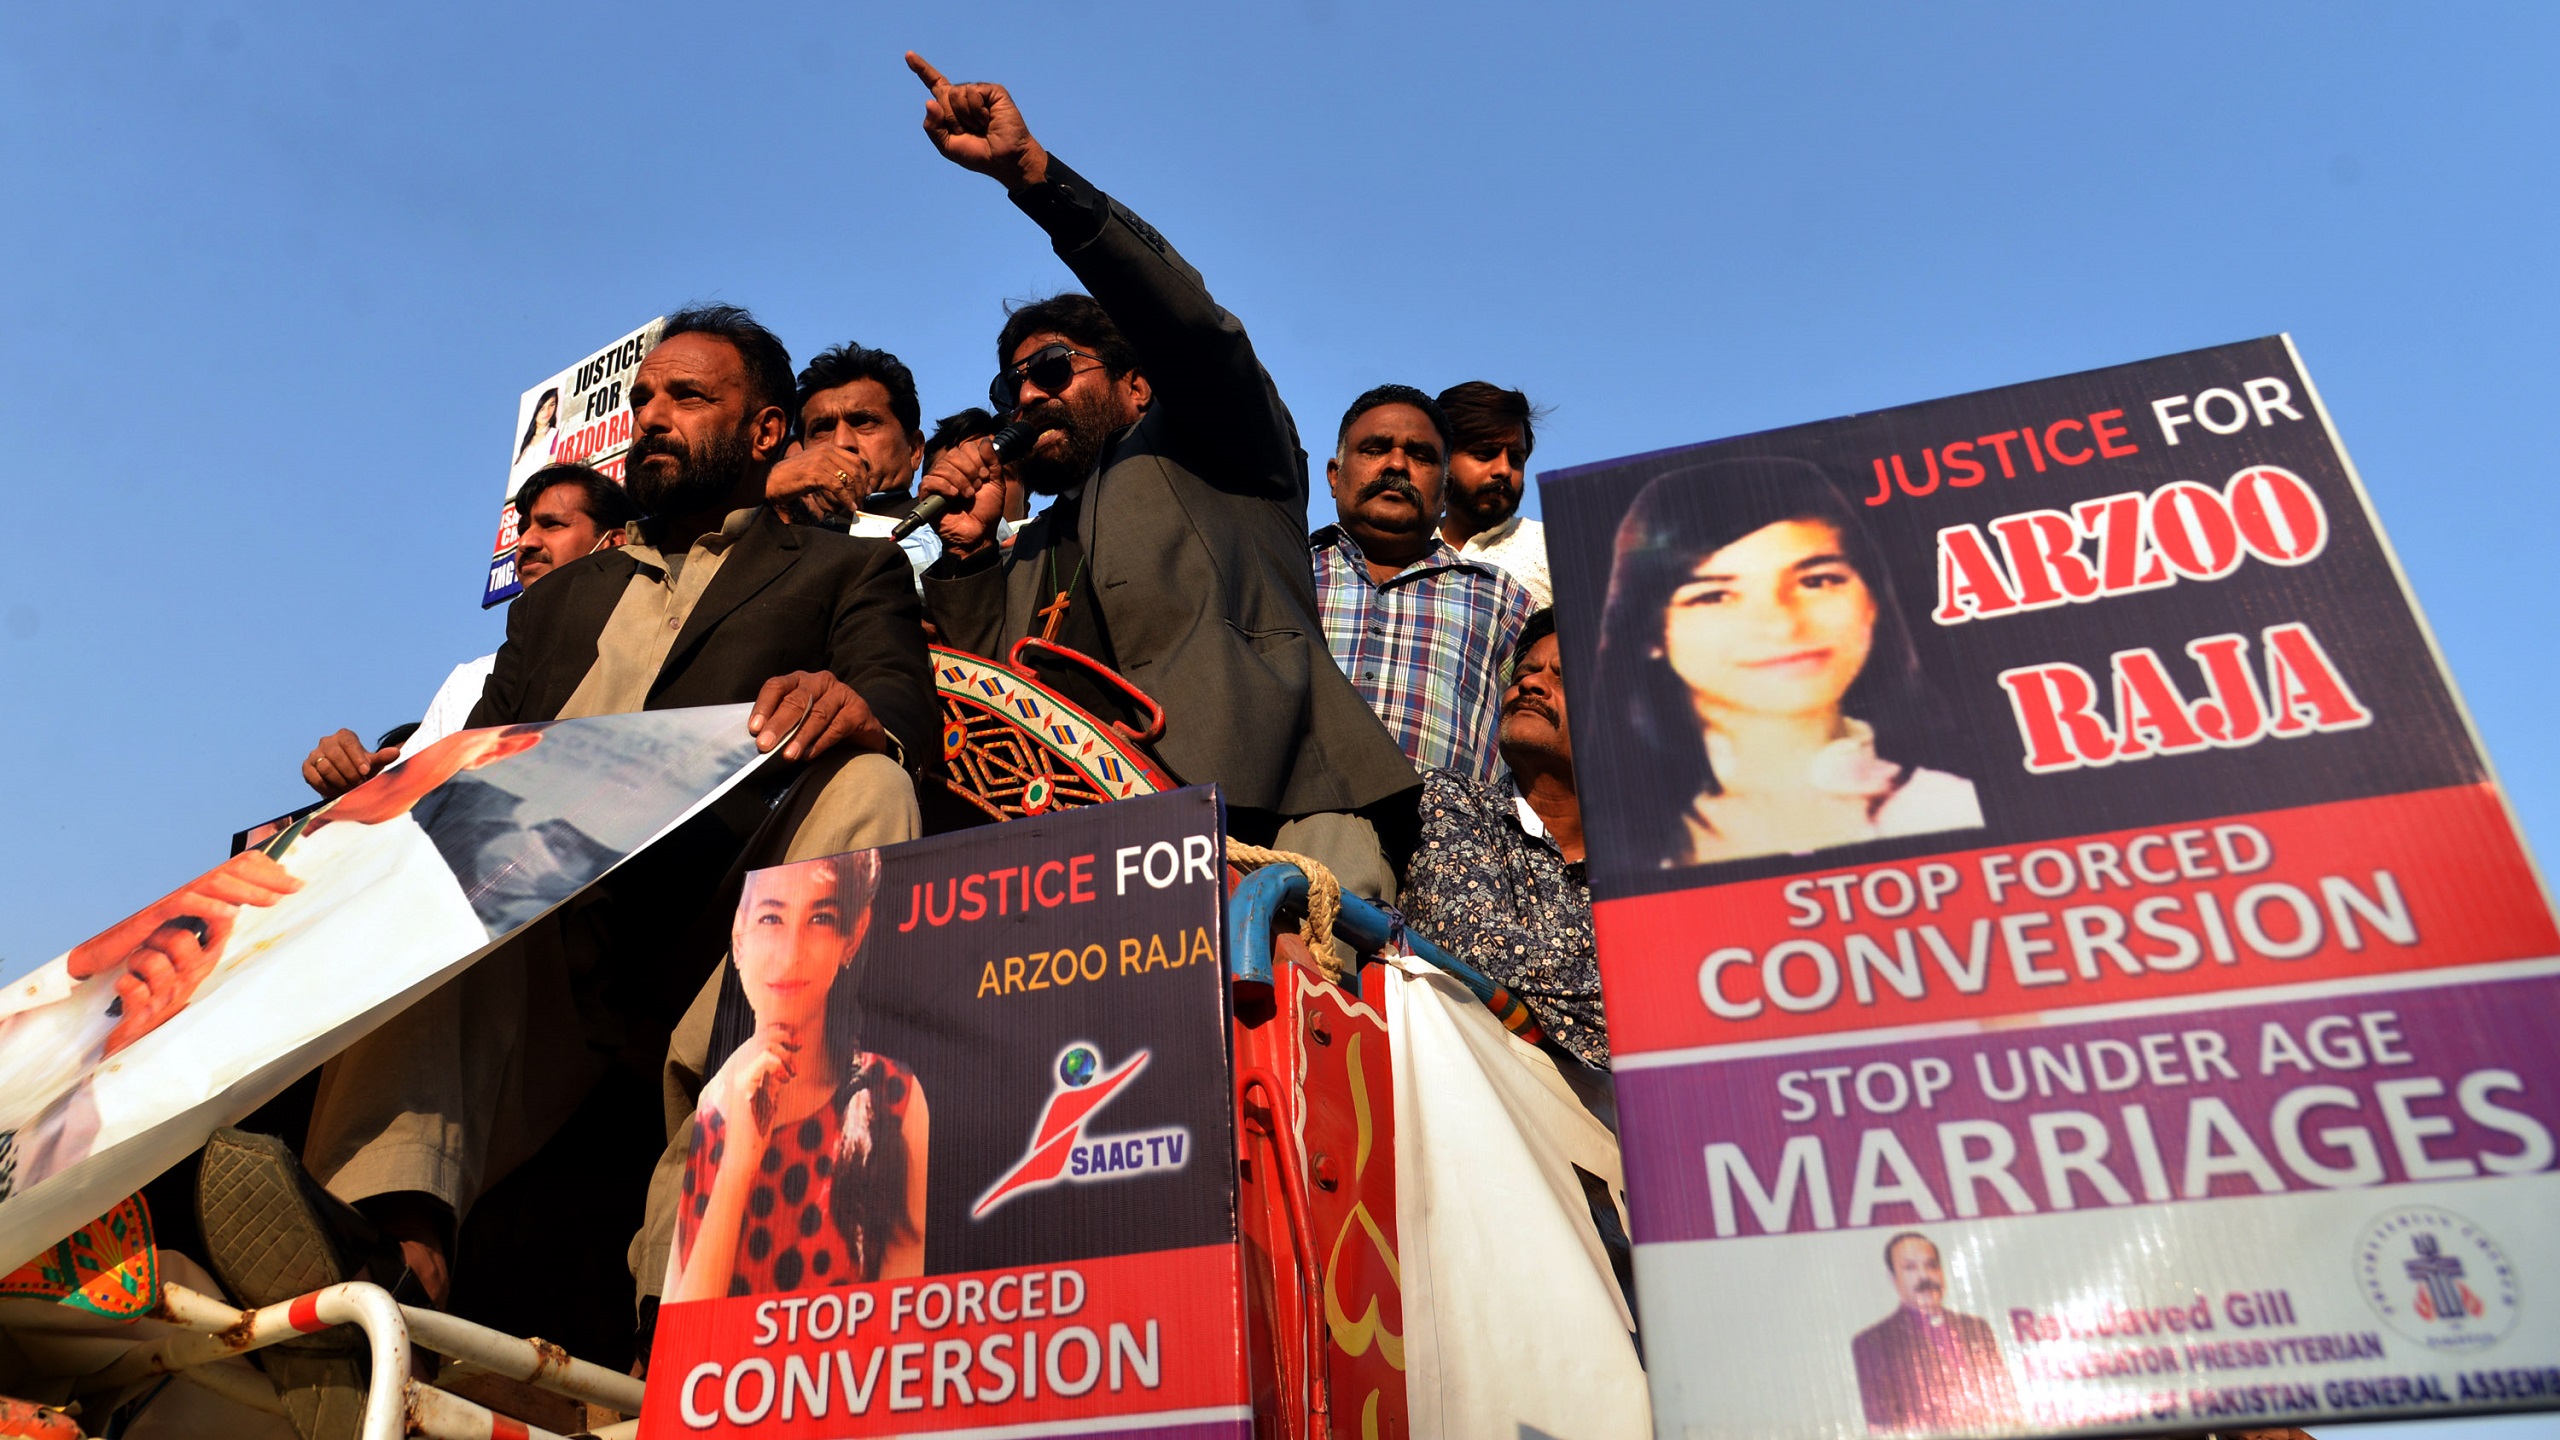 Pakistan: Bill to Outlaw Forced Conversion Blocked After Fierce Opposition